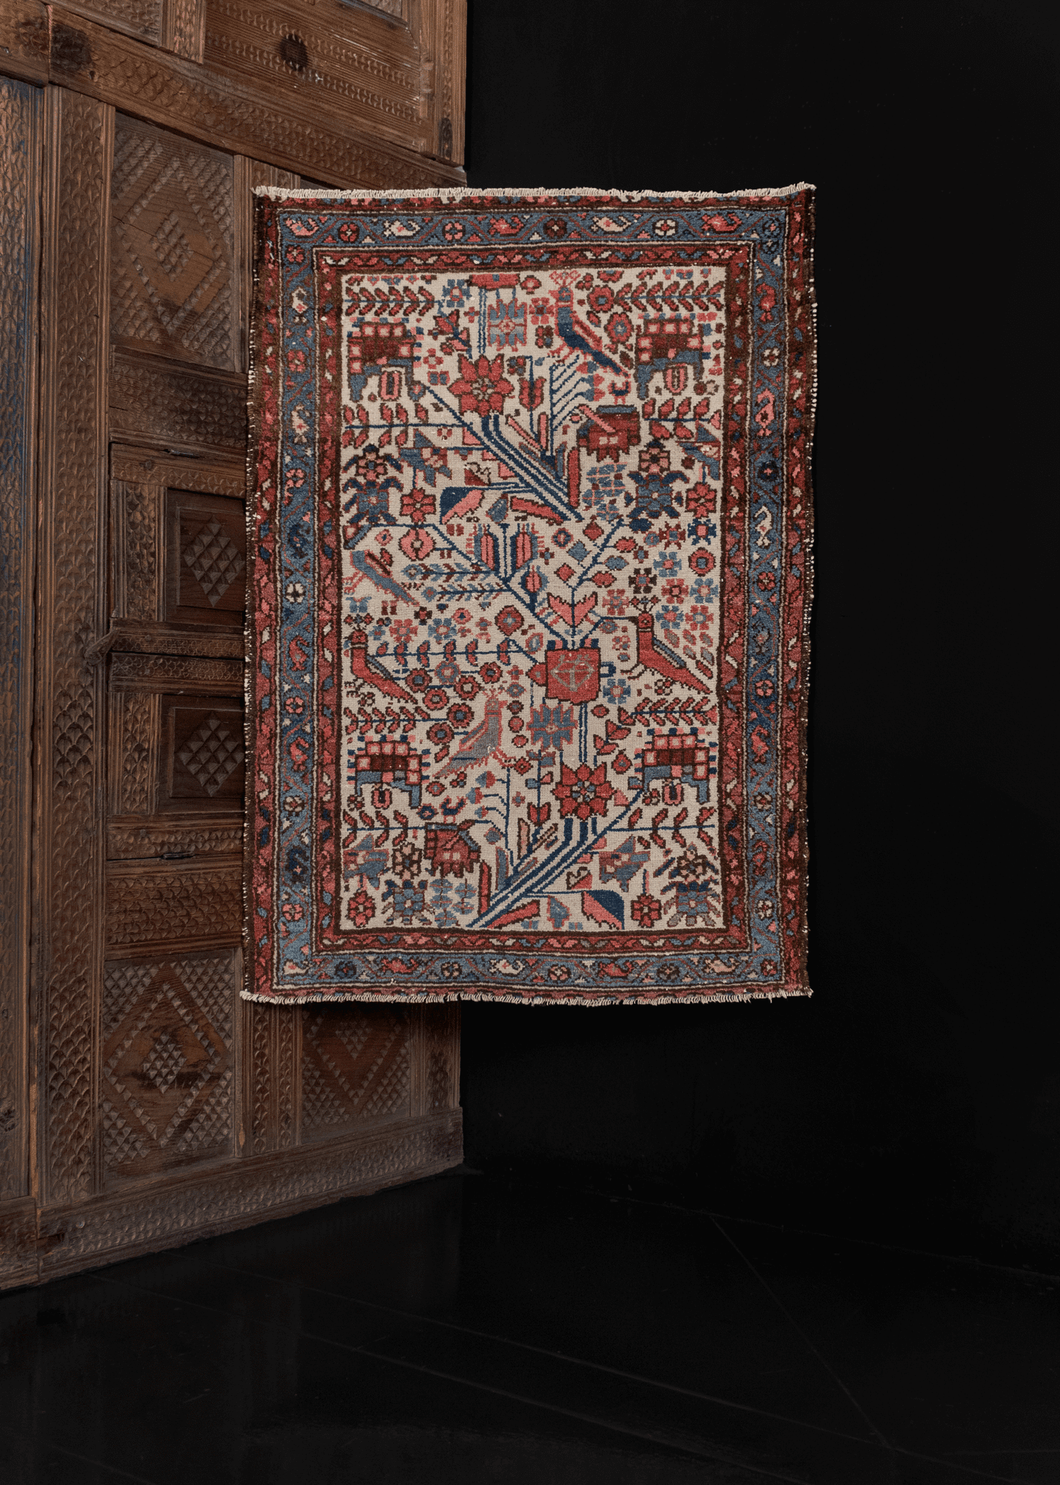 1920s Hamadan rug from West Iran in good condition with low pile and a geometric design of flowers and birds in pinks and blues on an ivory field.